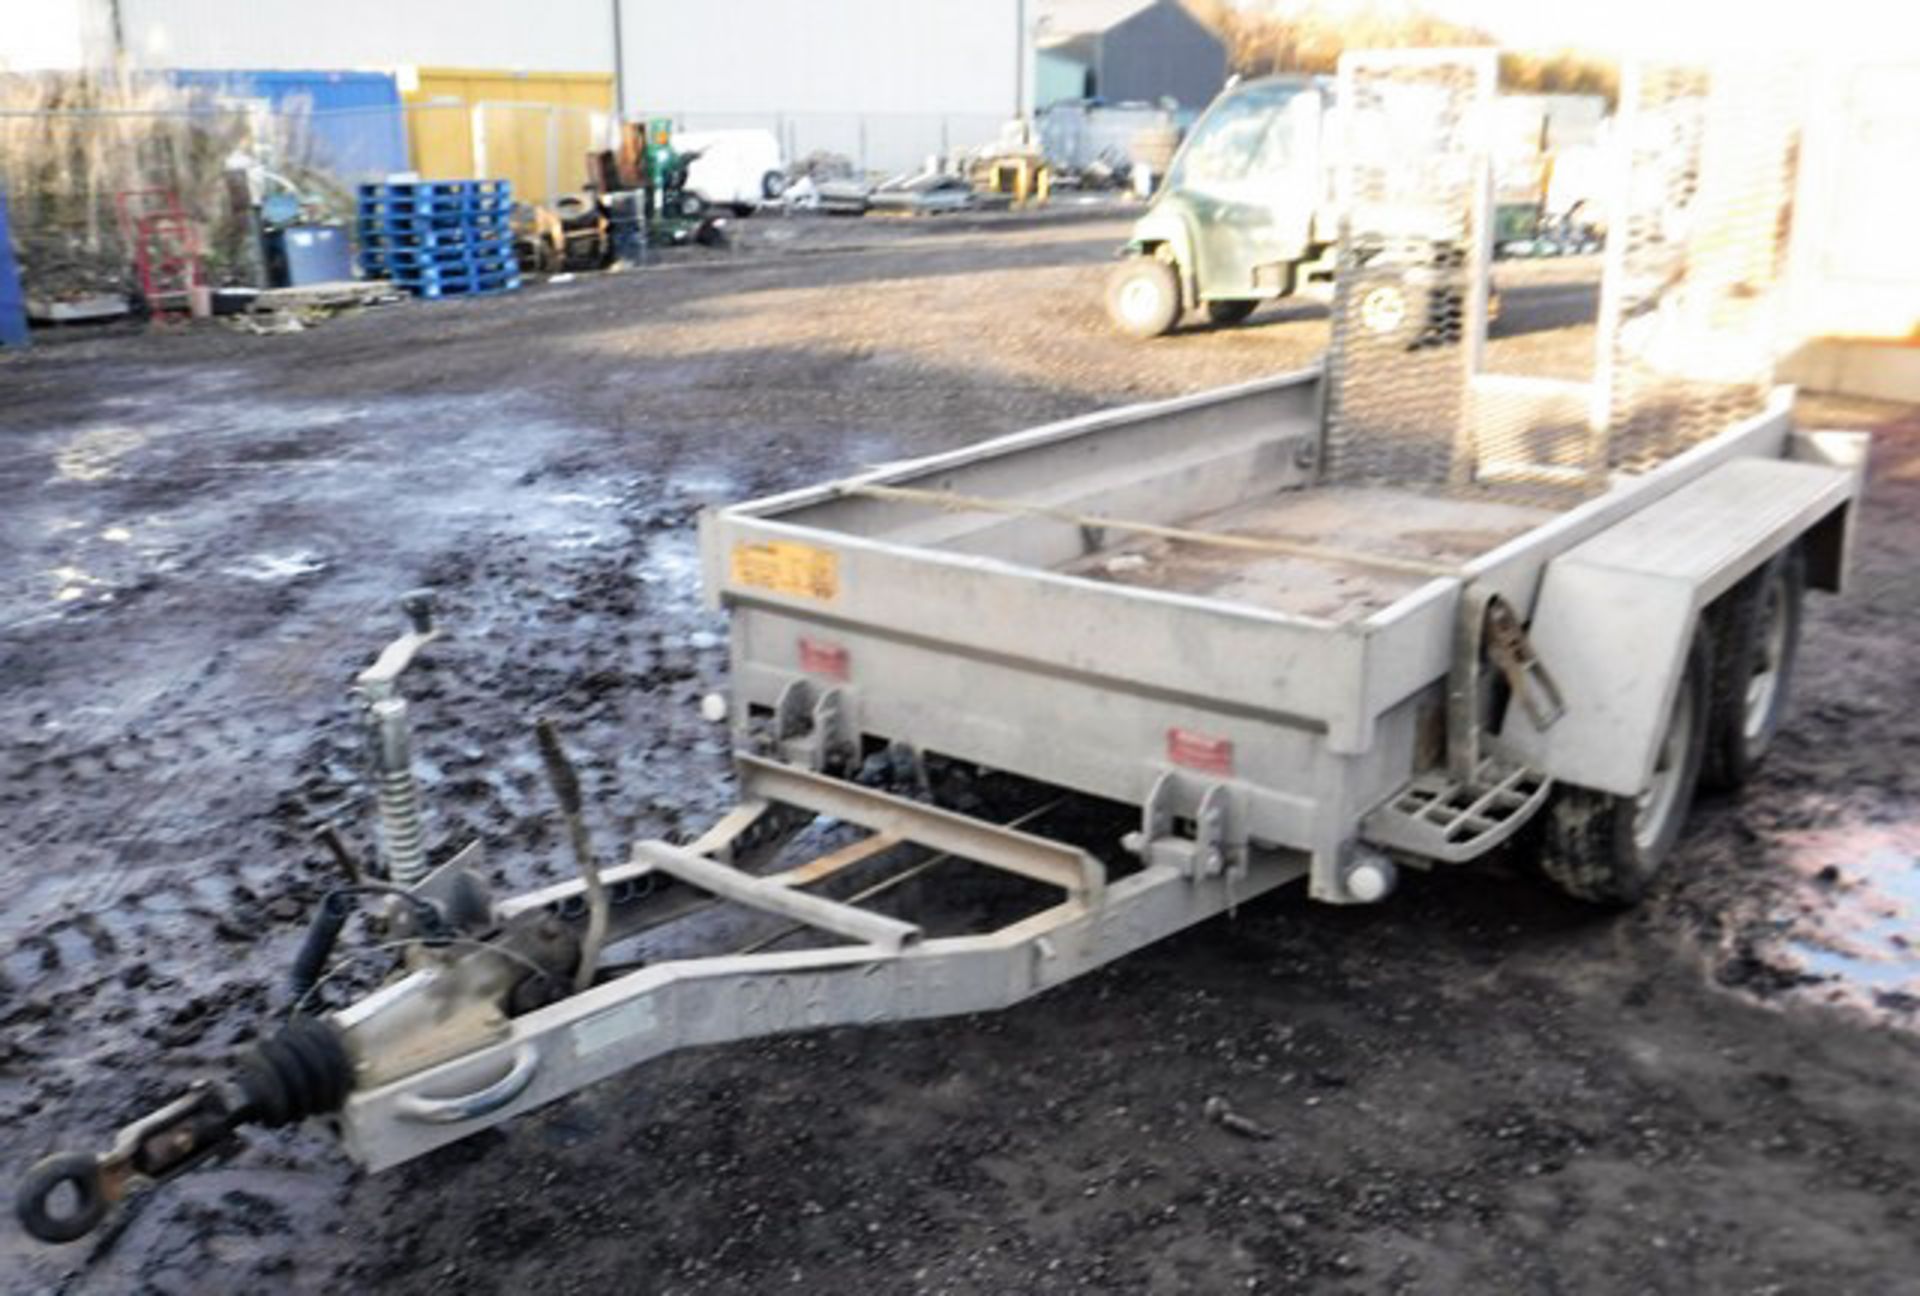 INDESPENSION 8' X 4' PLANT TRAILER, TWIN AXLE, S/N SDHG20840GG077046, GROSS TRAILER WEIGHT - 2600, A - Image 2 of 12